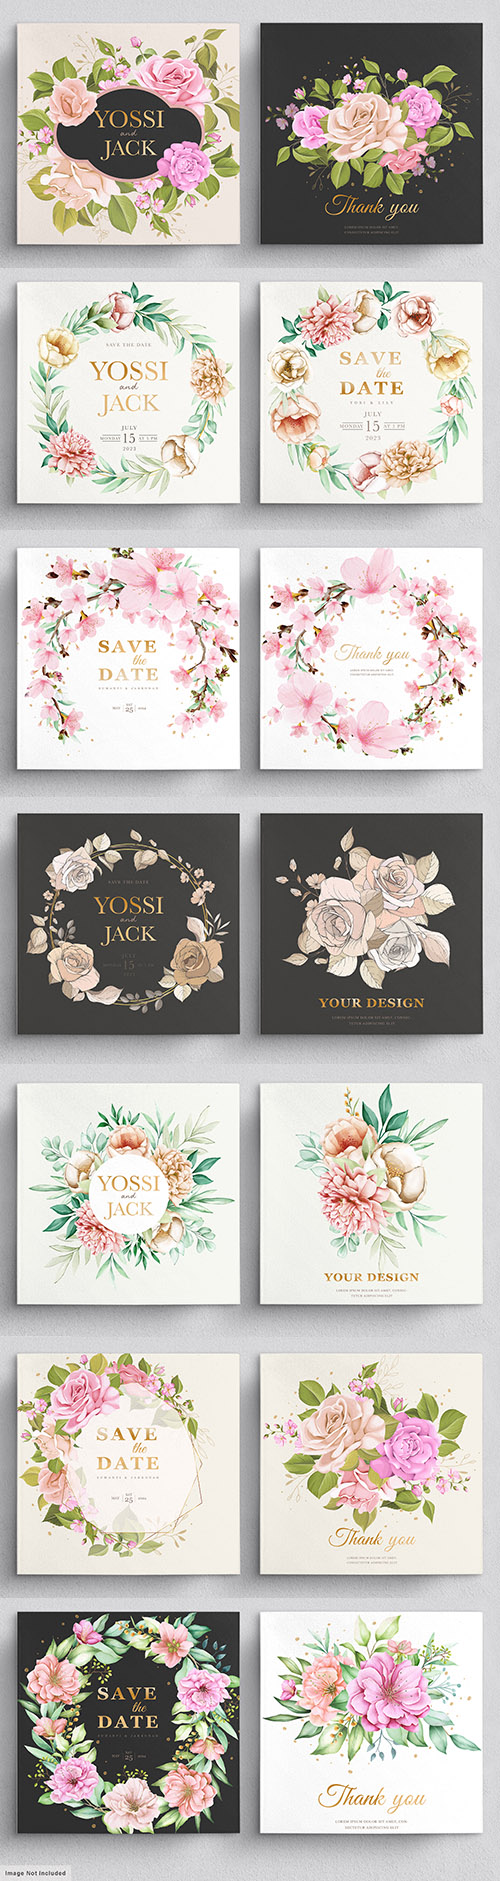 Wedding elegant invitation template with flowers and leaves
